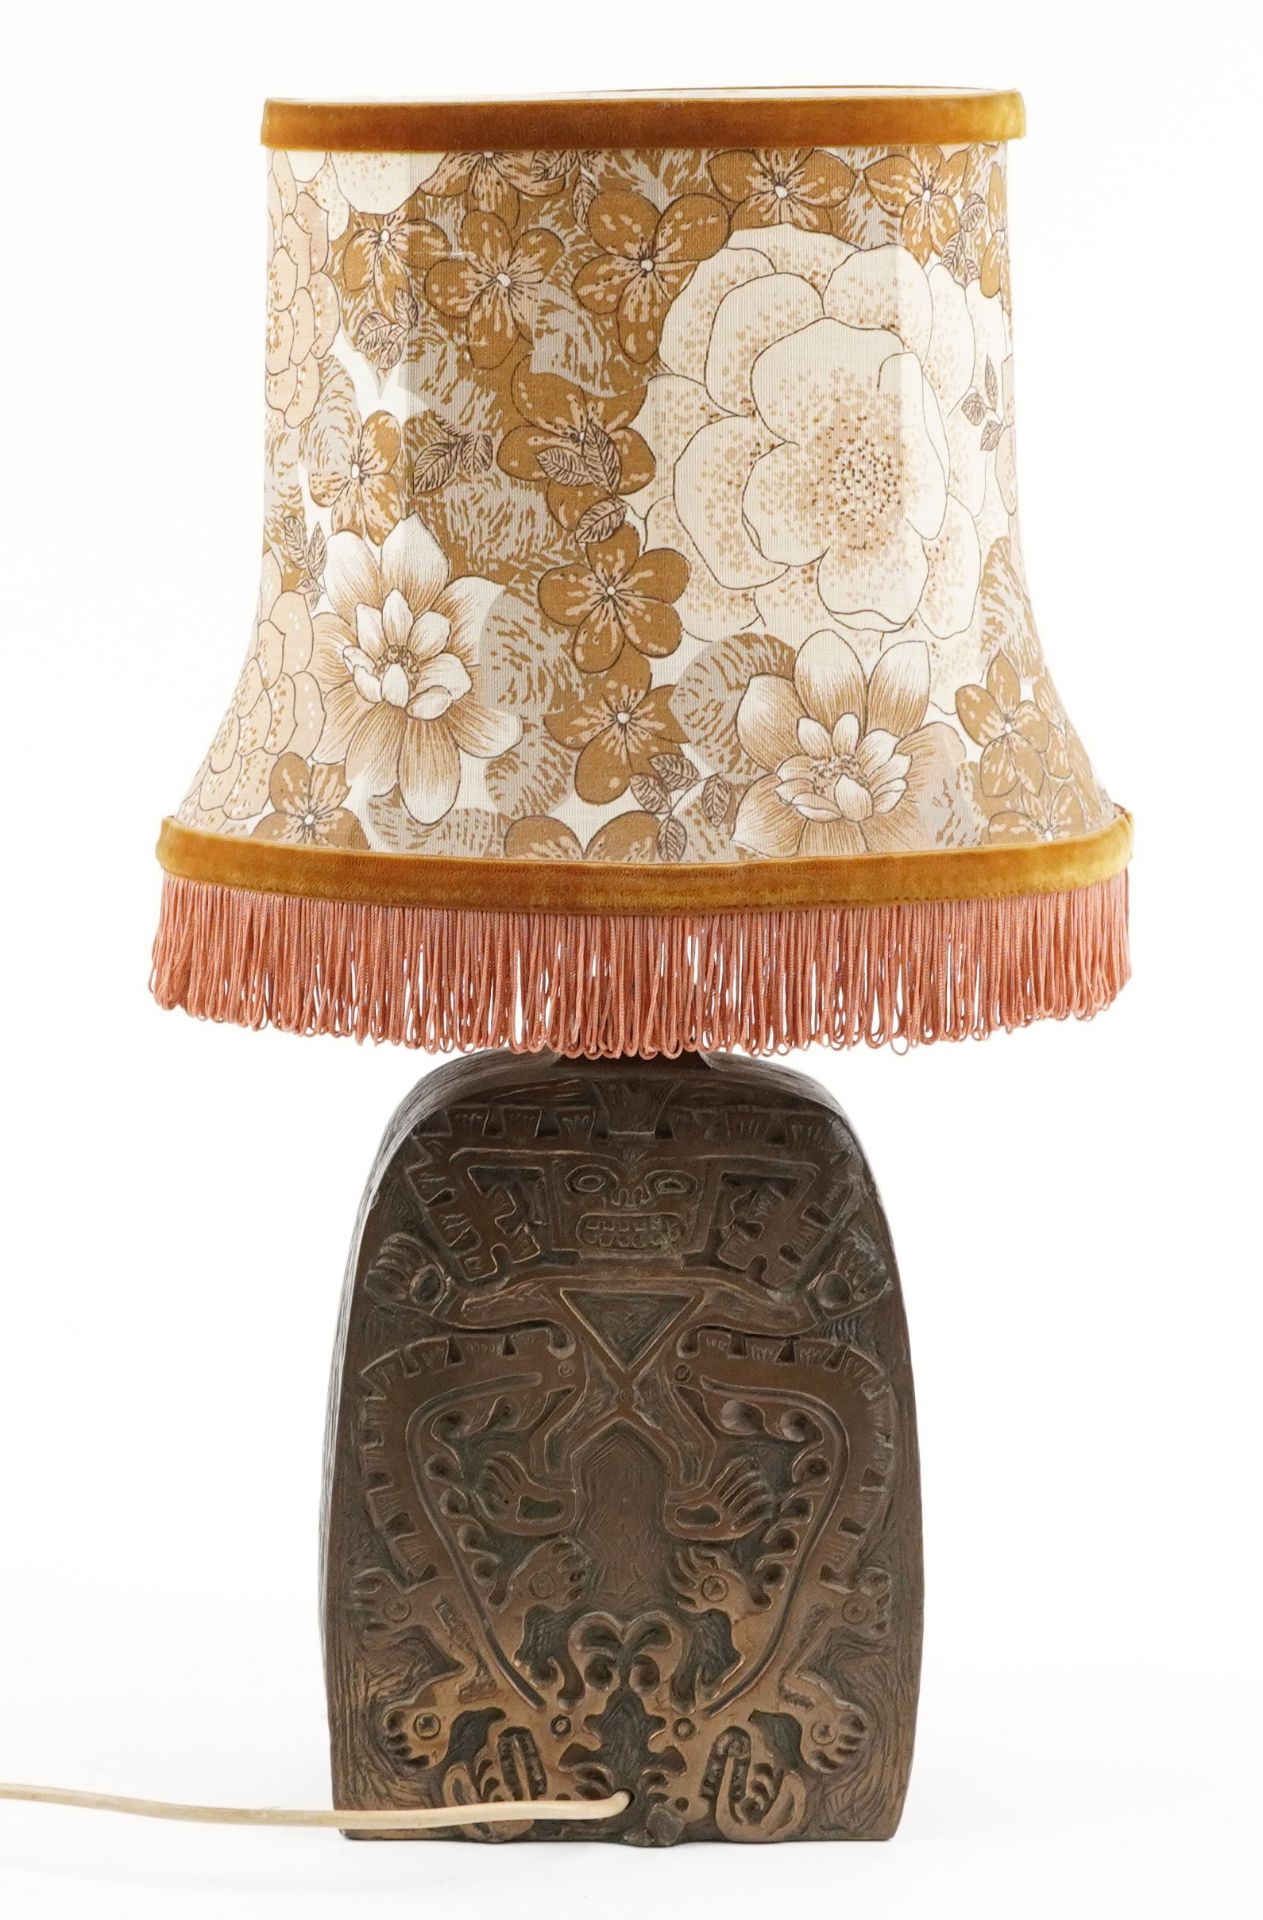 Mid century style cold cast bronze table lamp with shade decorated in relief with mythical - Image 3 of 4